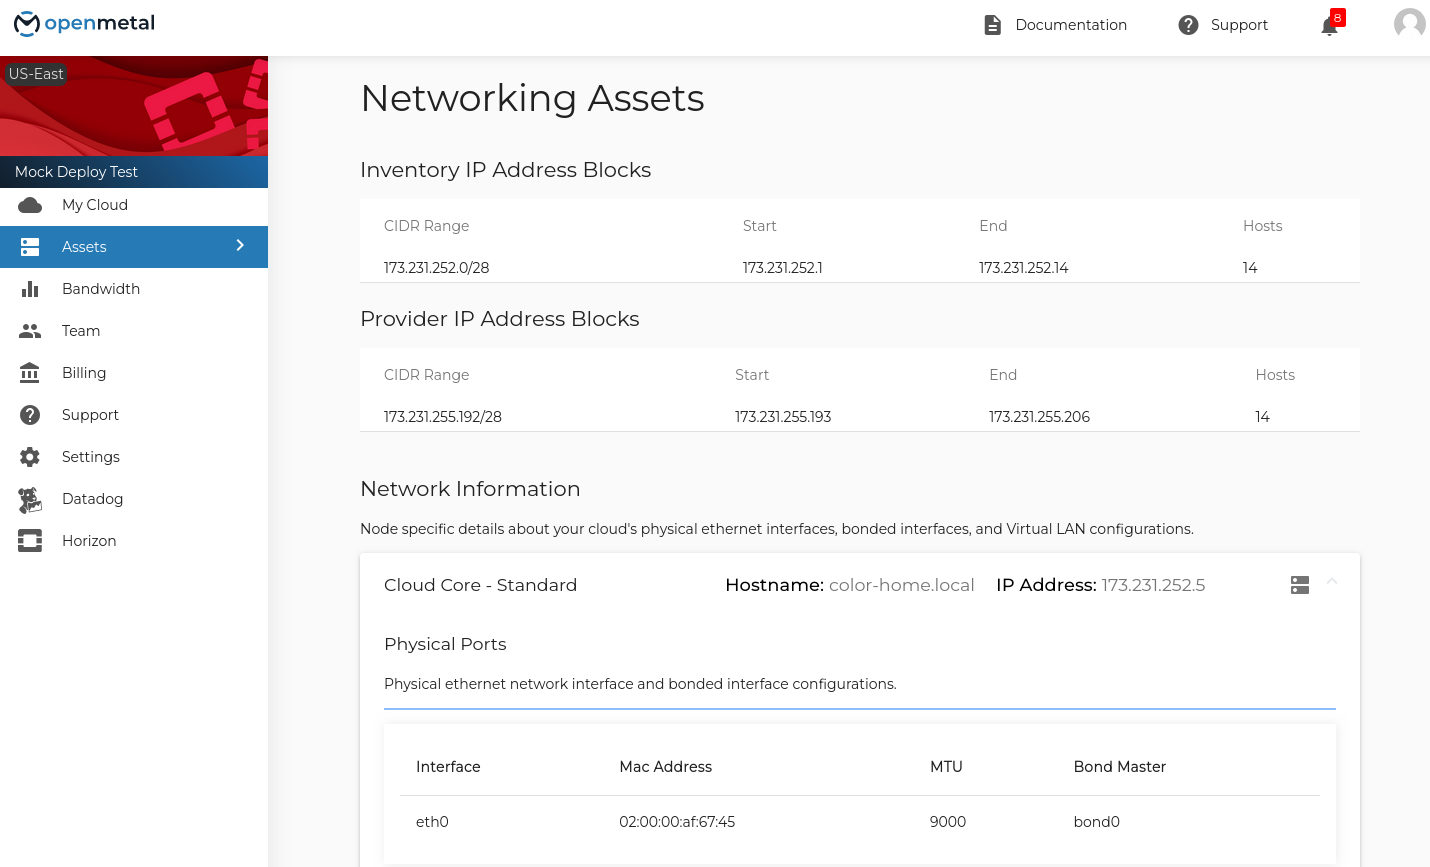 OpenMetal Central Networking Assets Dashboard